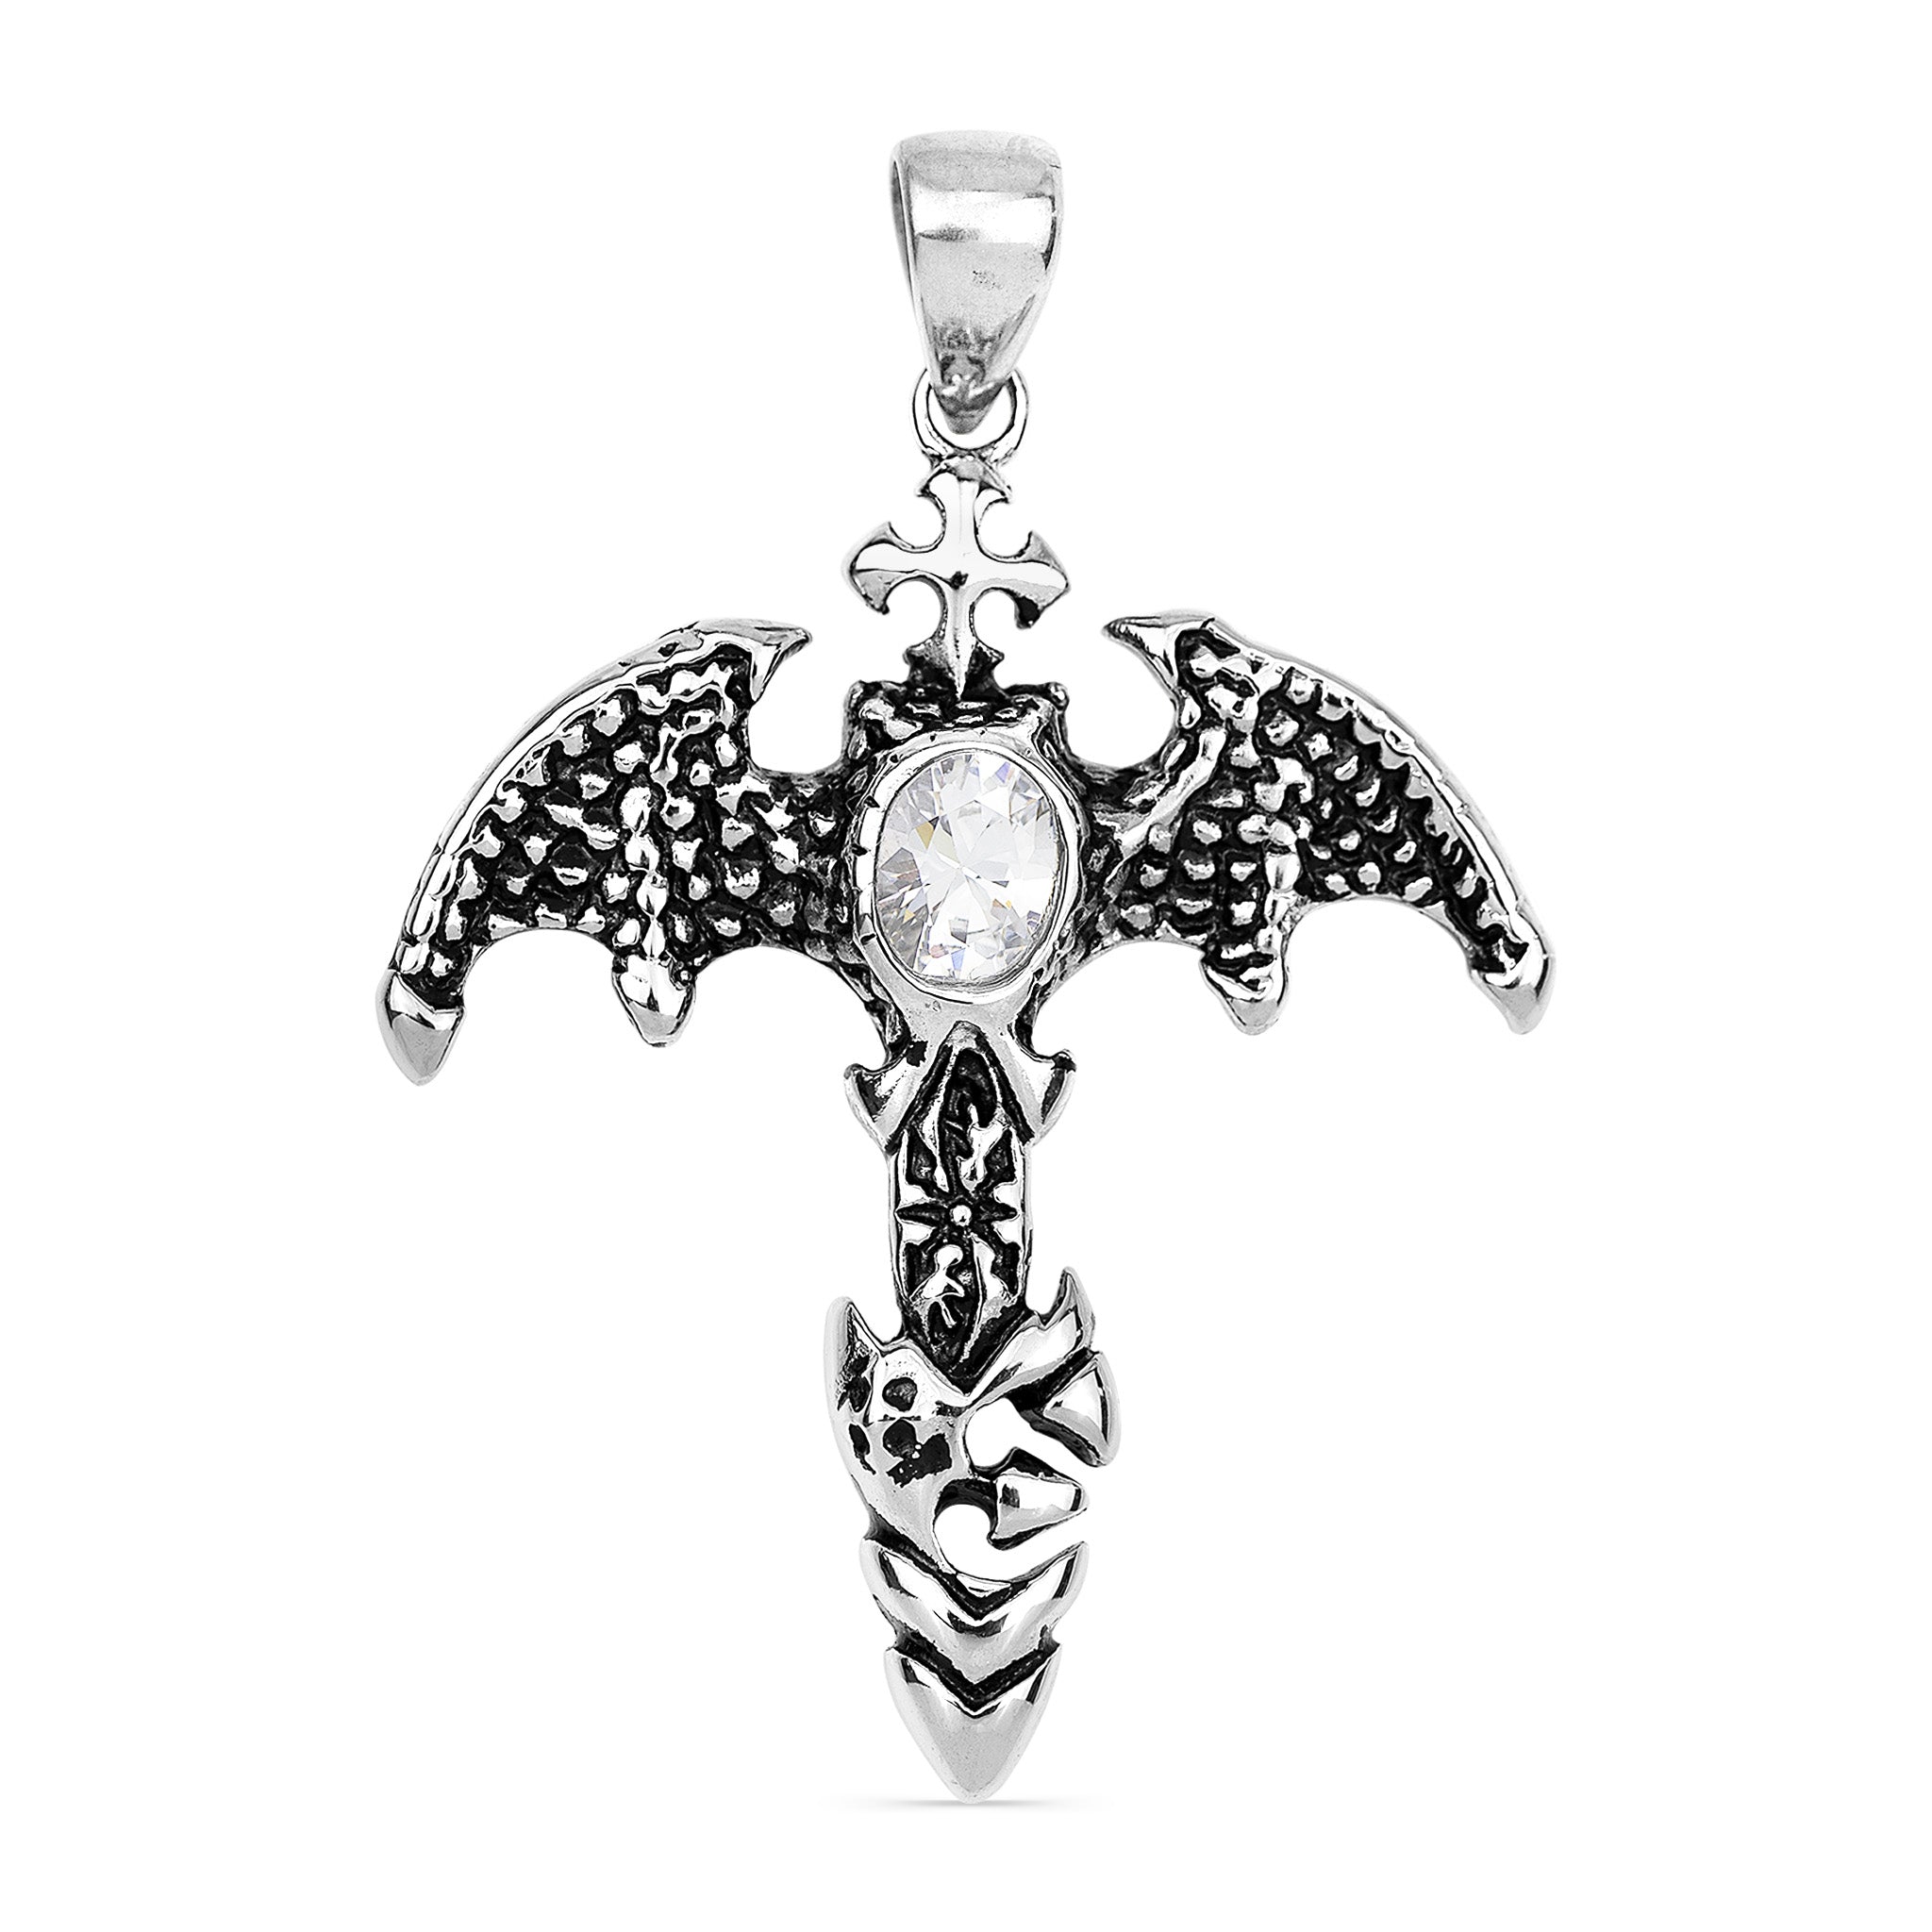 Stainless Steel Dragon Wings Cross With CZ Center Pendant / PDJ2001